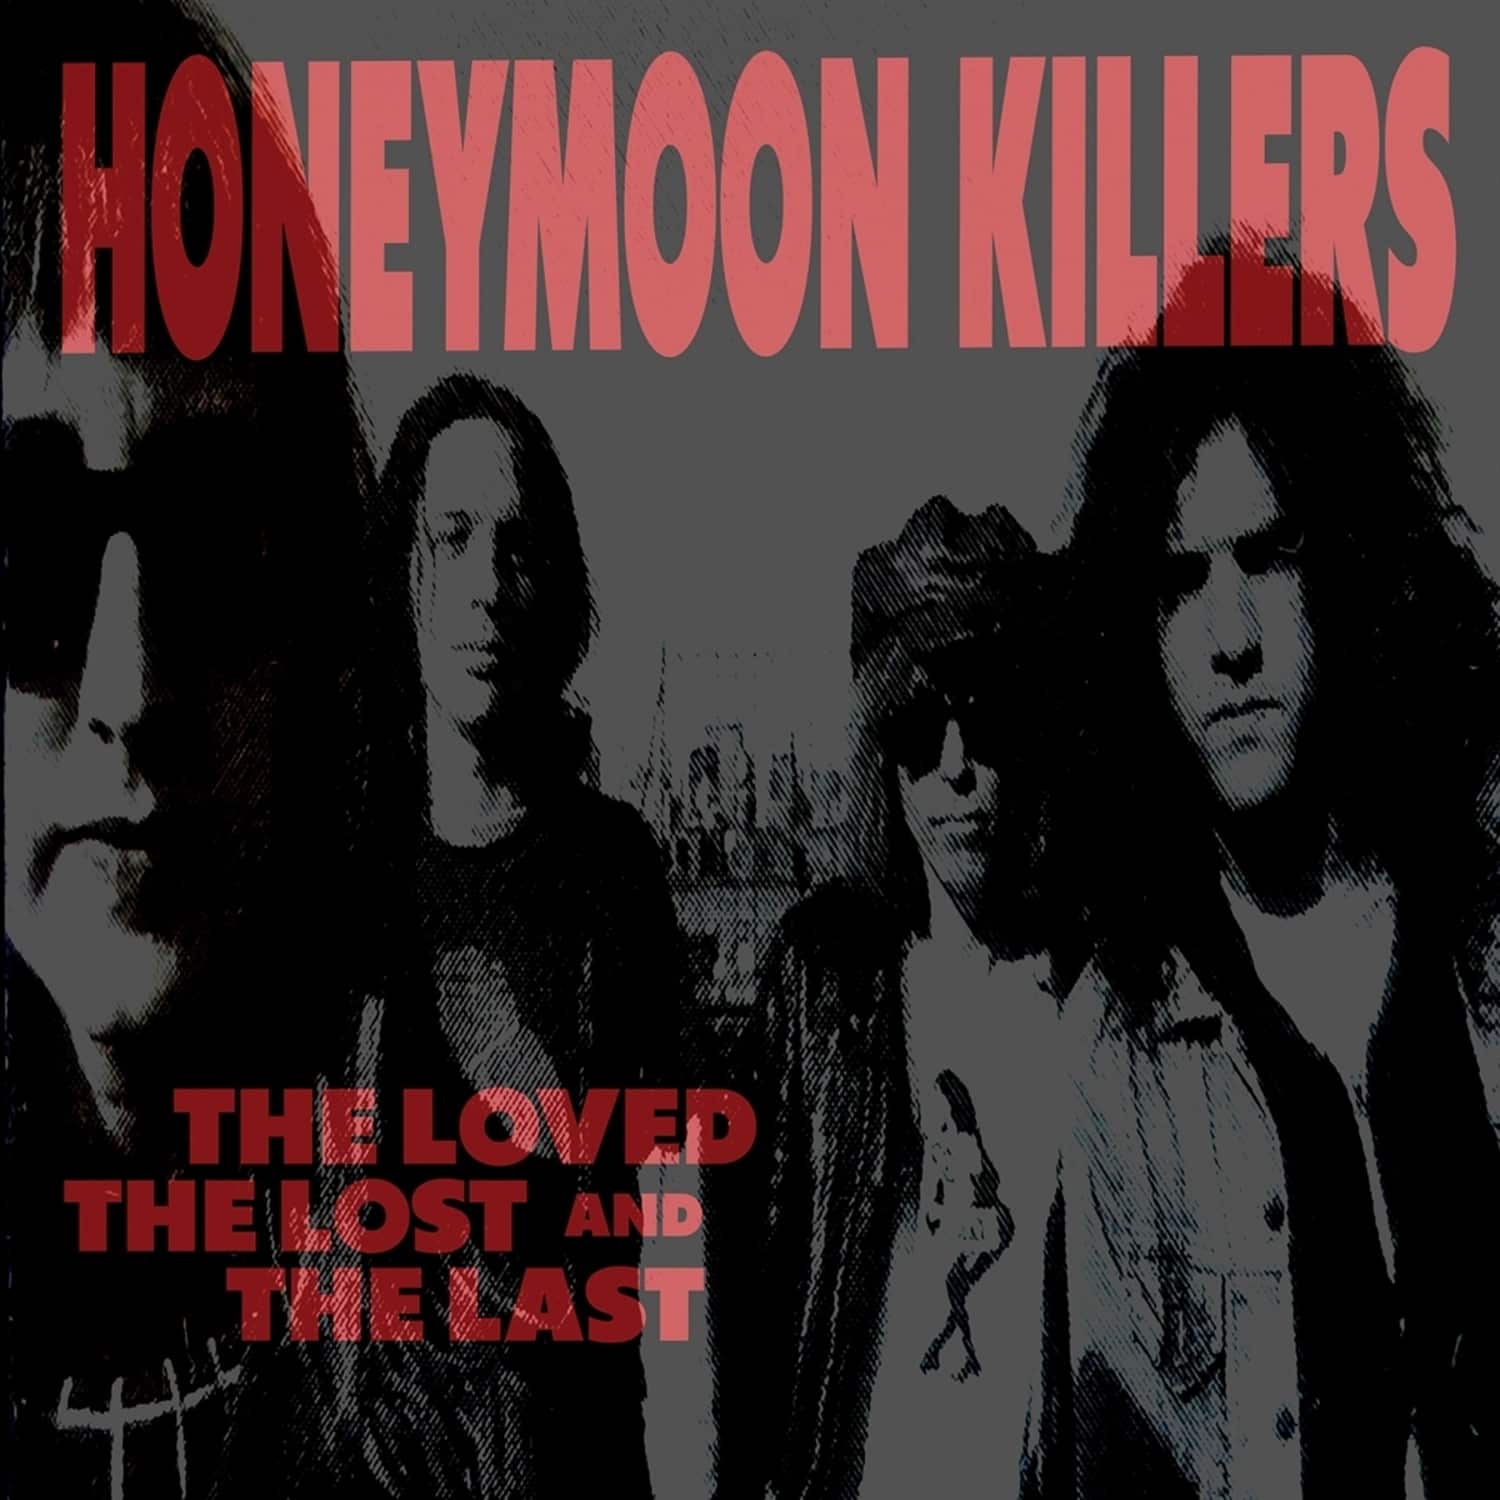 The Honeymoon Killers - THE LOVED, THE LOST AND THE LAST 